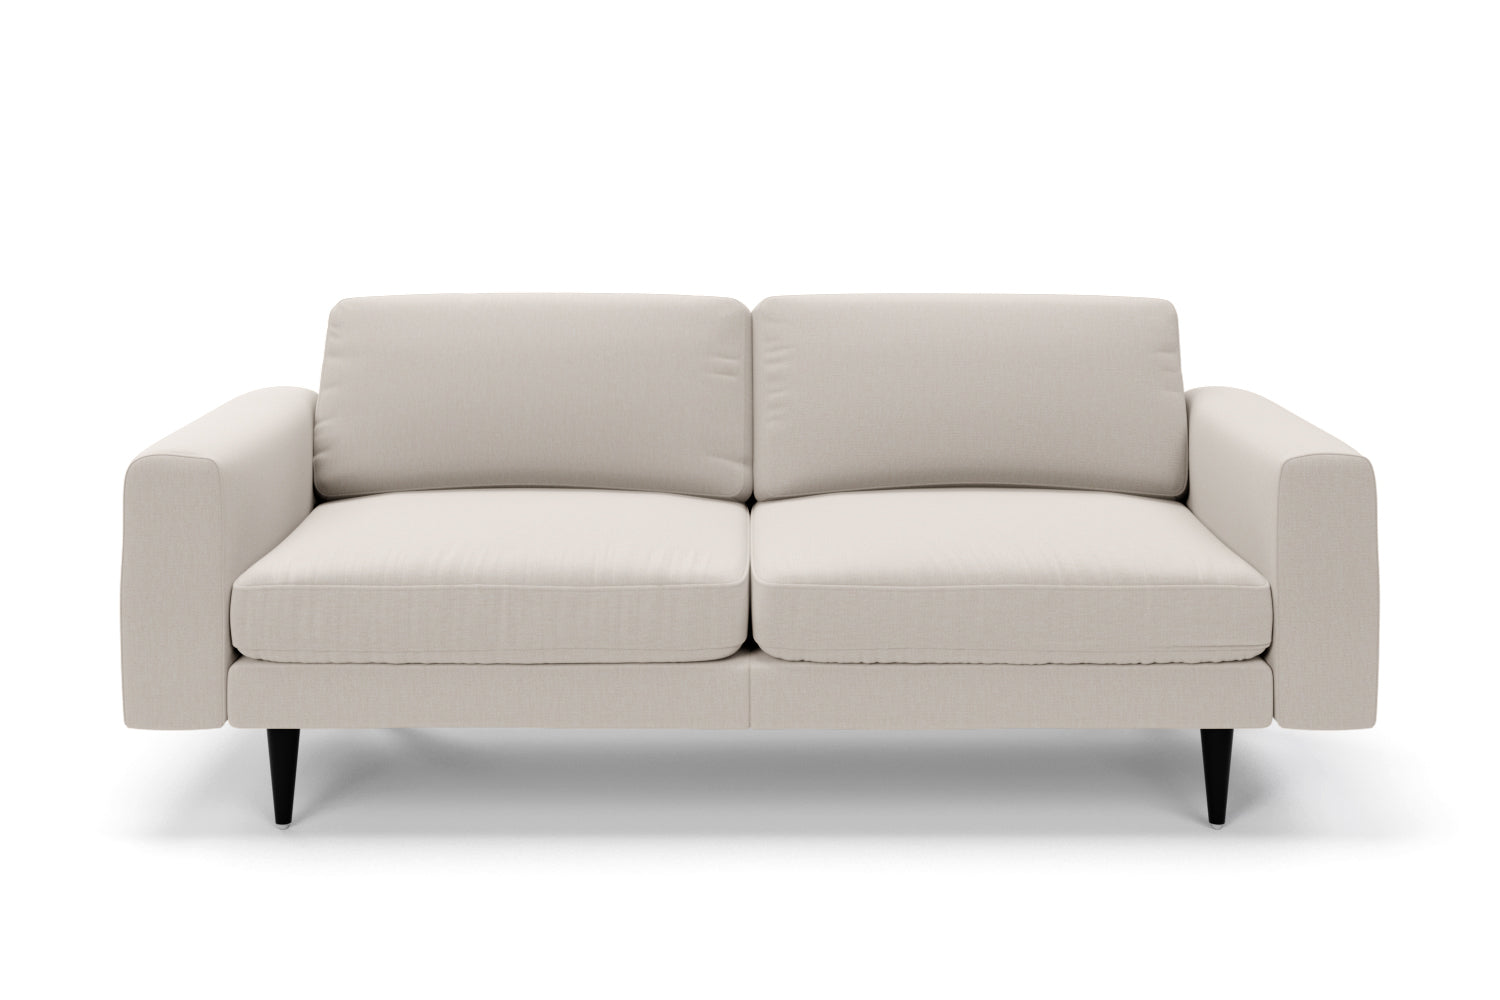 SNUG | The Big Chill 3 Seater Sofa in Biscuit variant_40520492187696